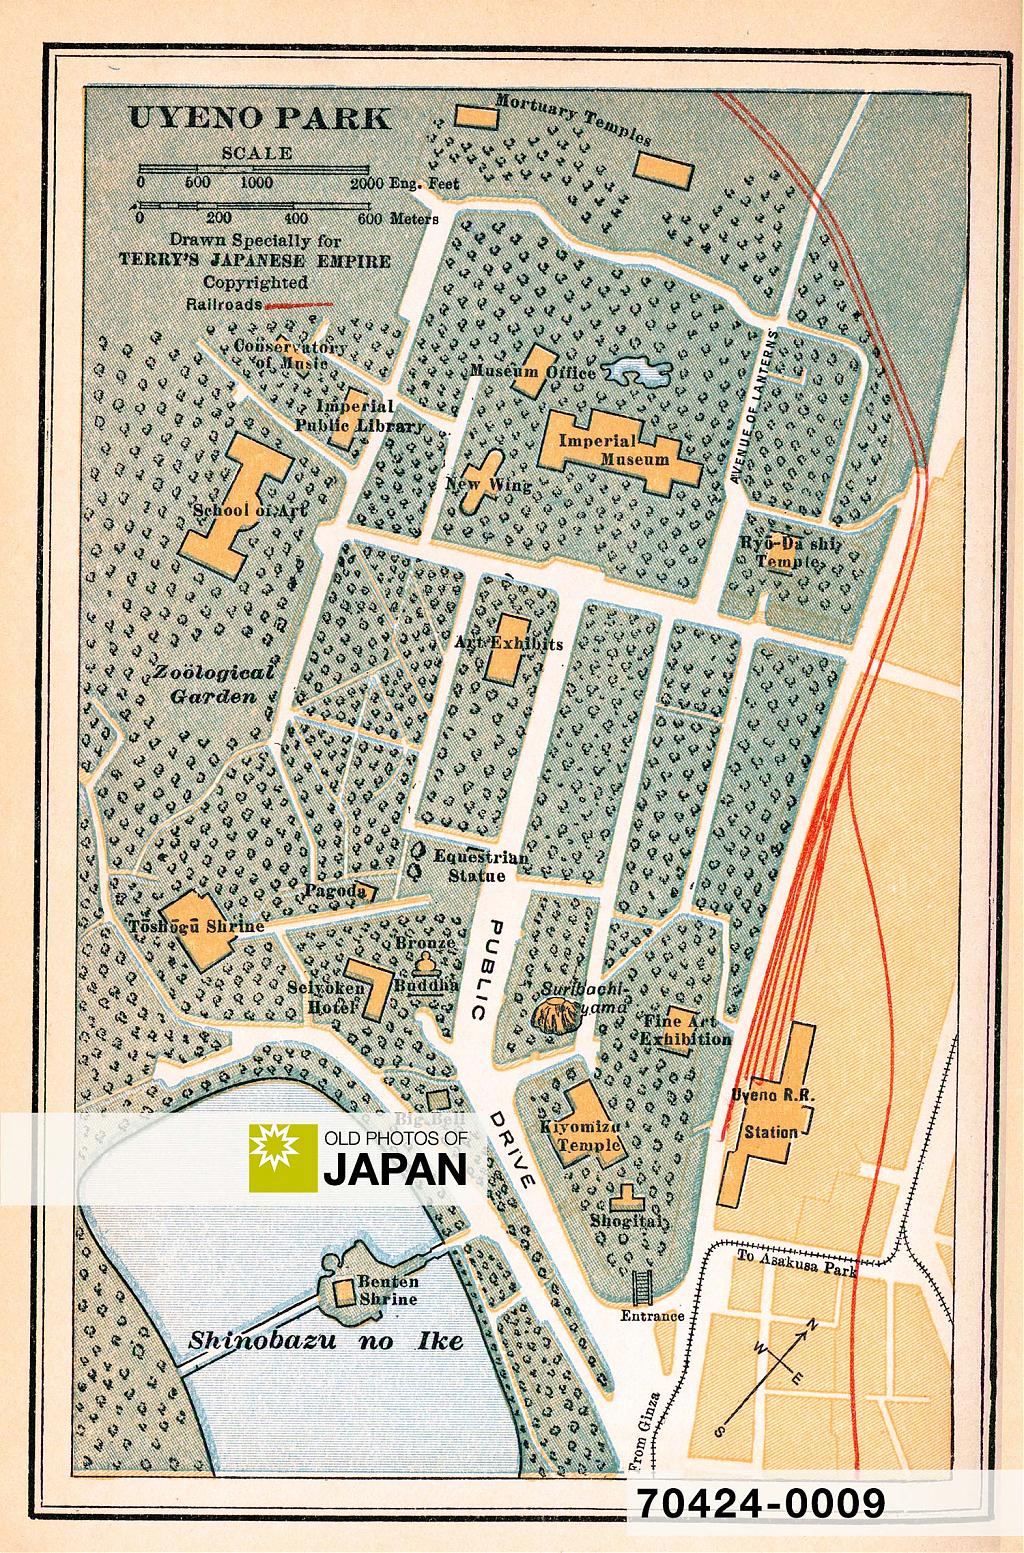 Map of Ueno Park from Terry's Guide to the Japanese Empire, 1920.